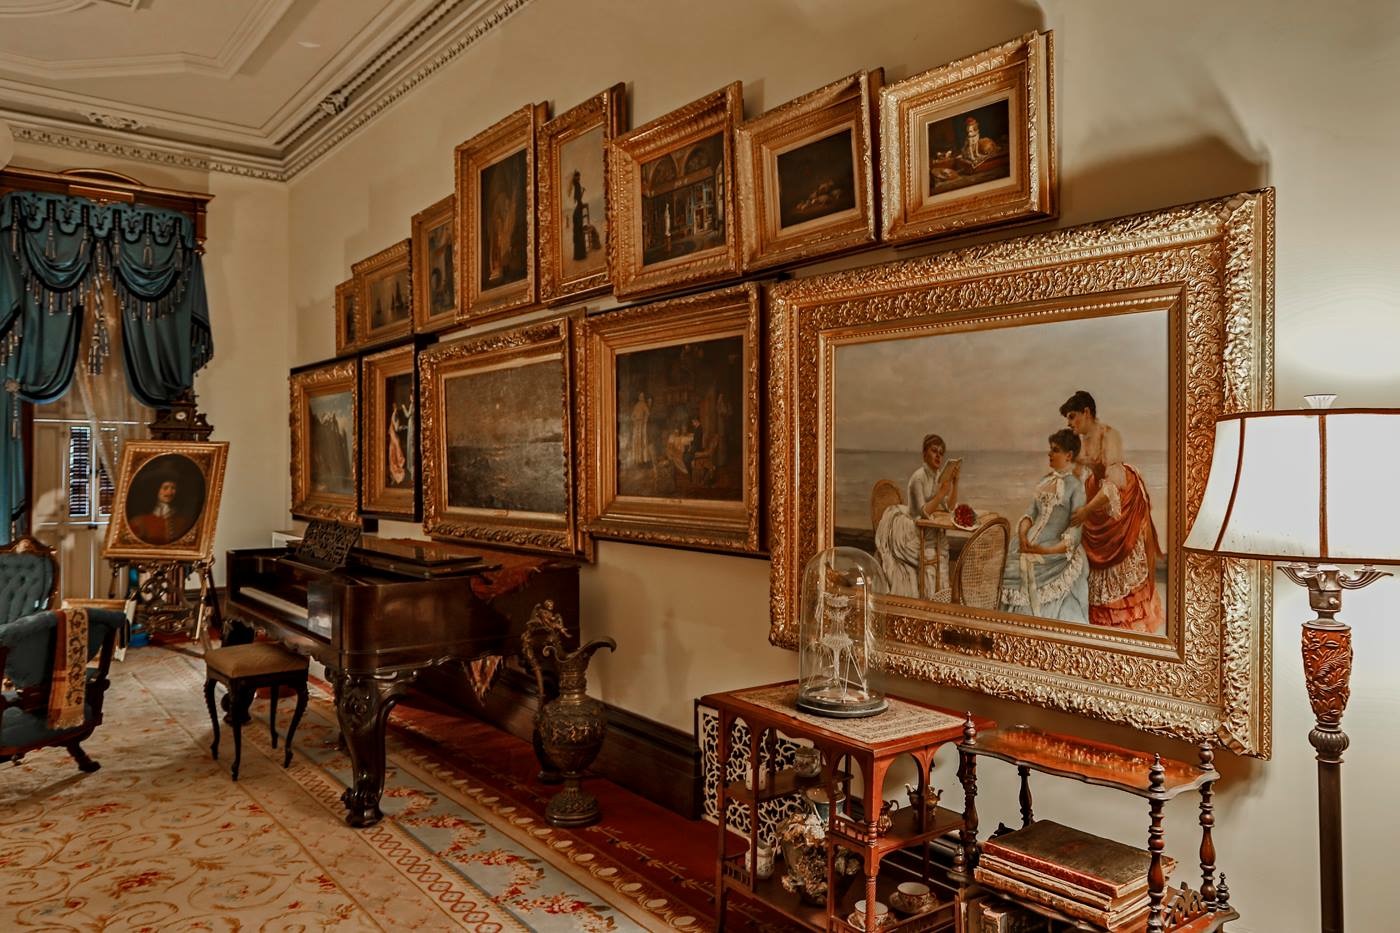 The drawing room piano and paintings wall, as seen from the right.